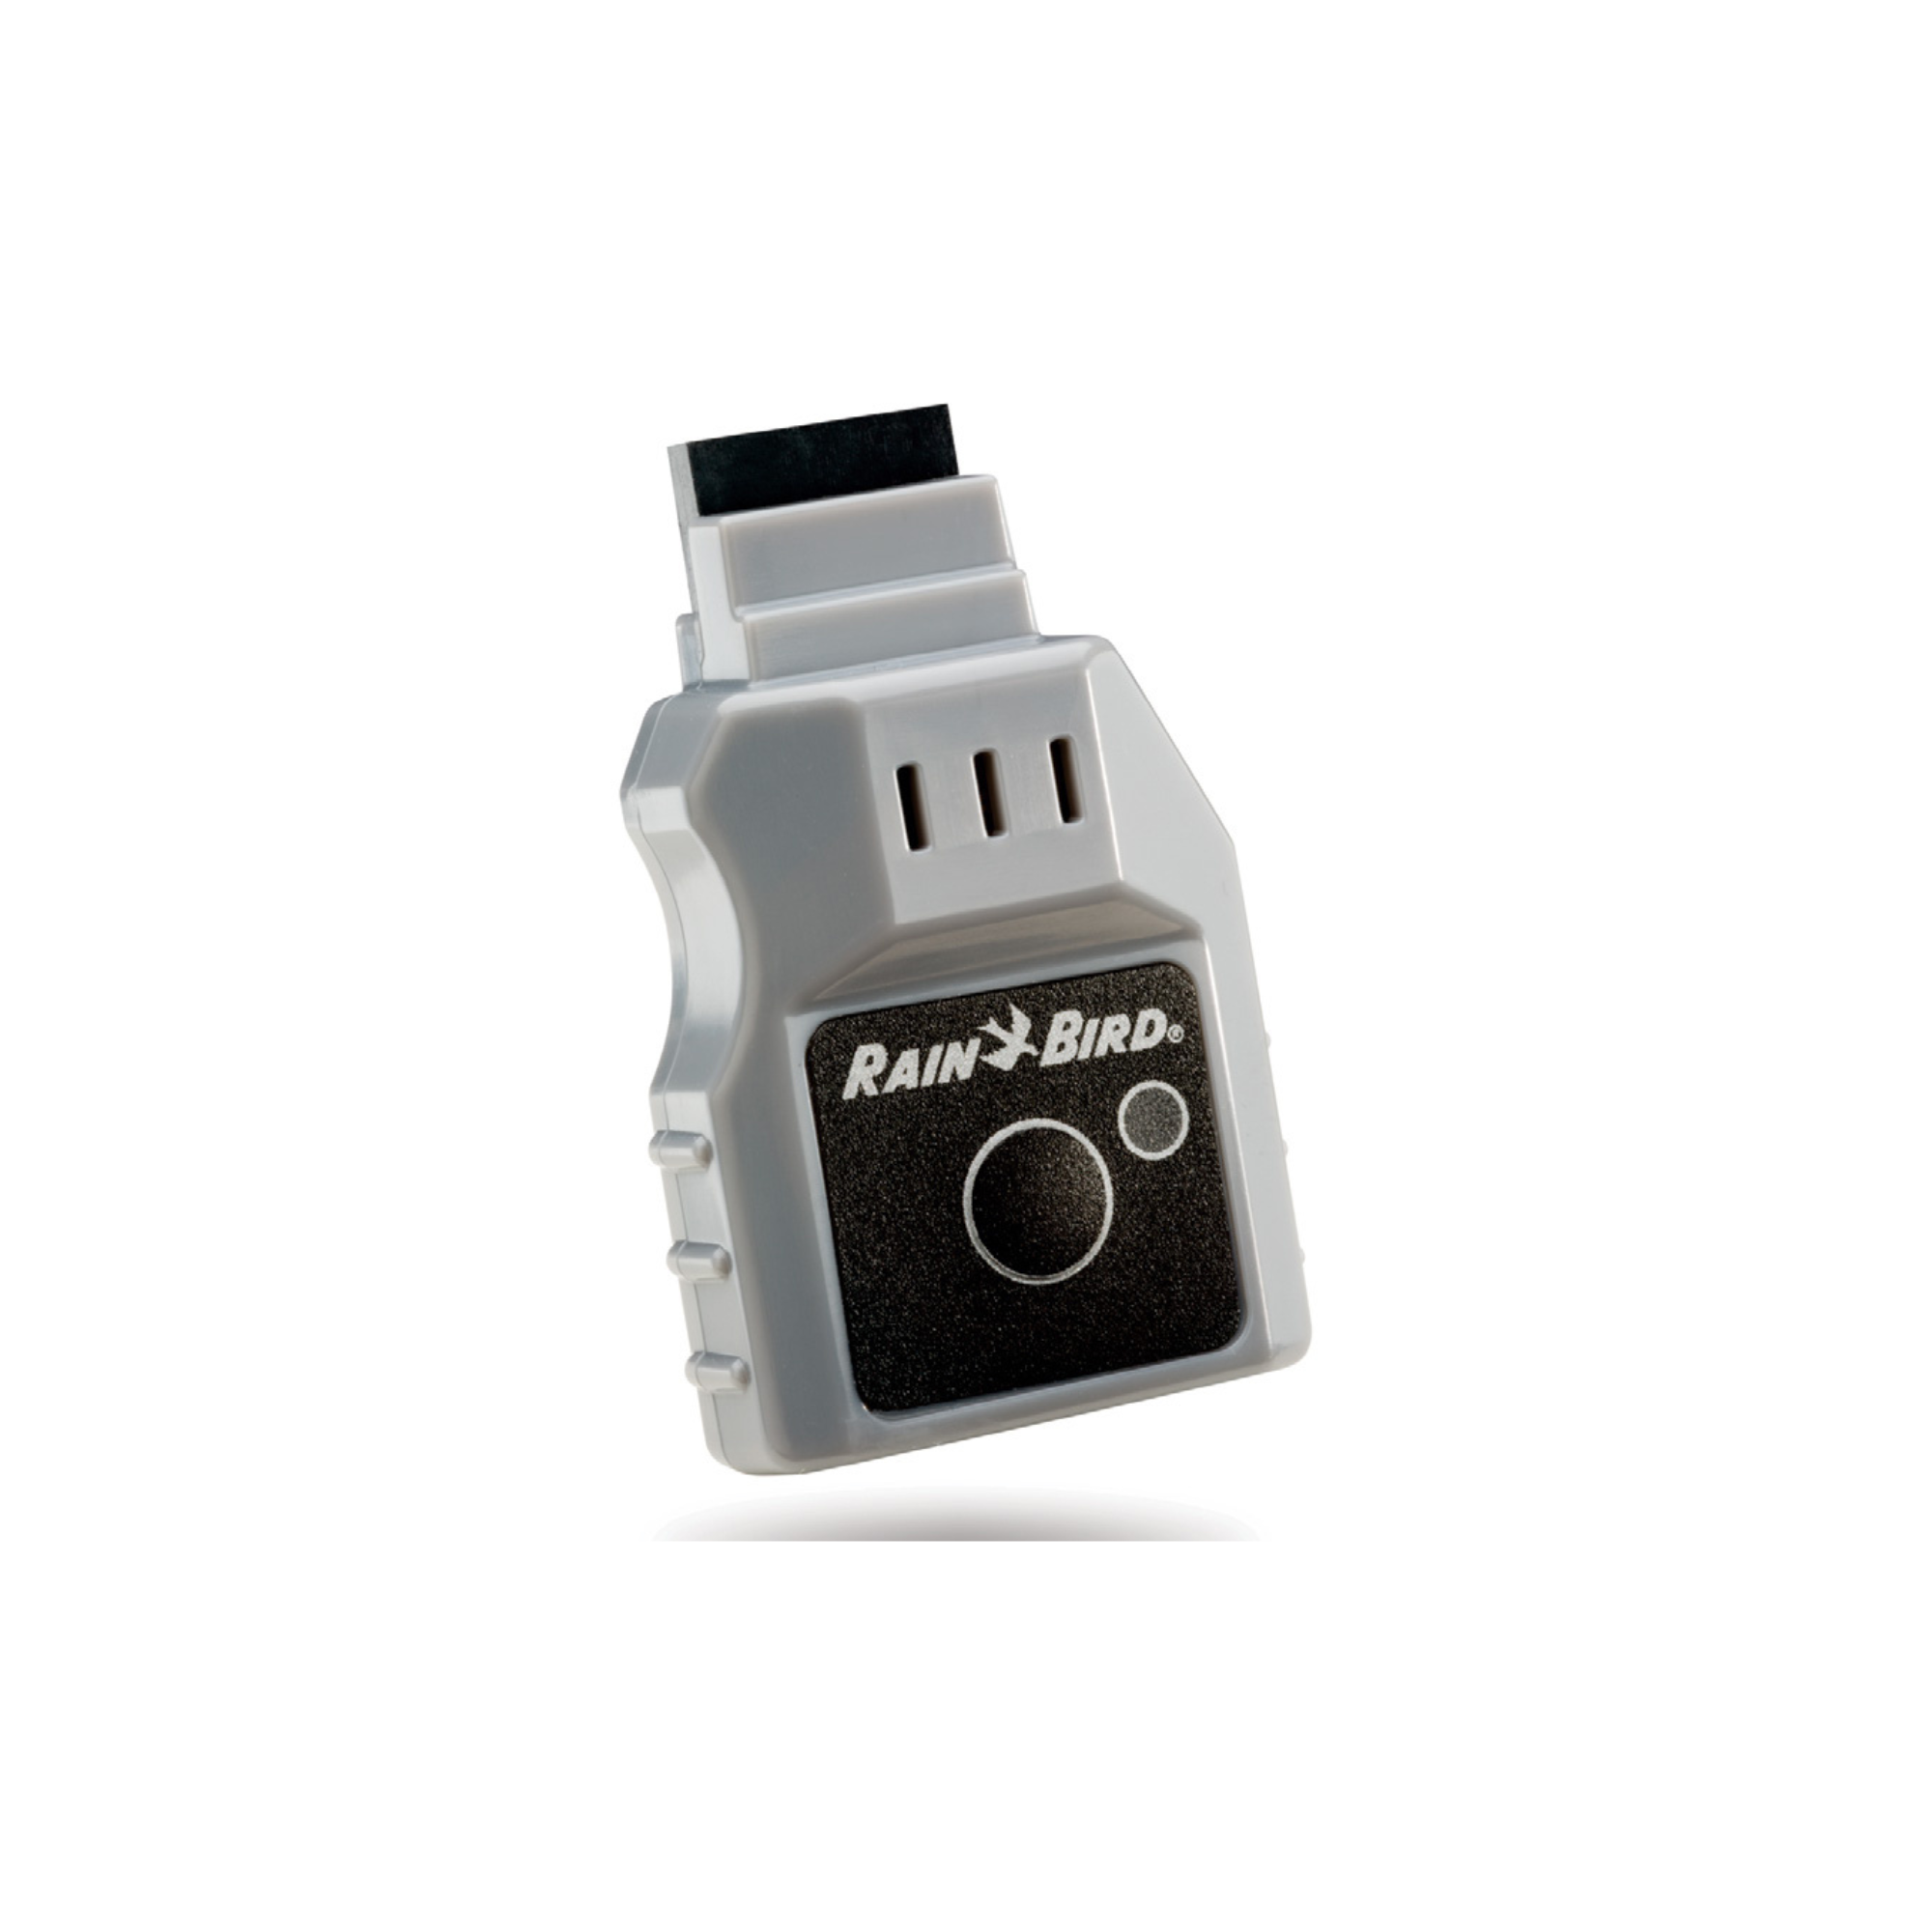 RAIN BIRD™ ESP-TM2 230vac Controllers with 4, 6, 8, or 12 Outputs WiFi Compatible and Weatherproof